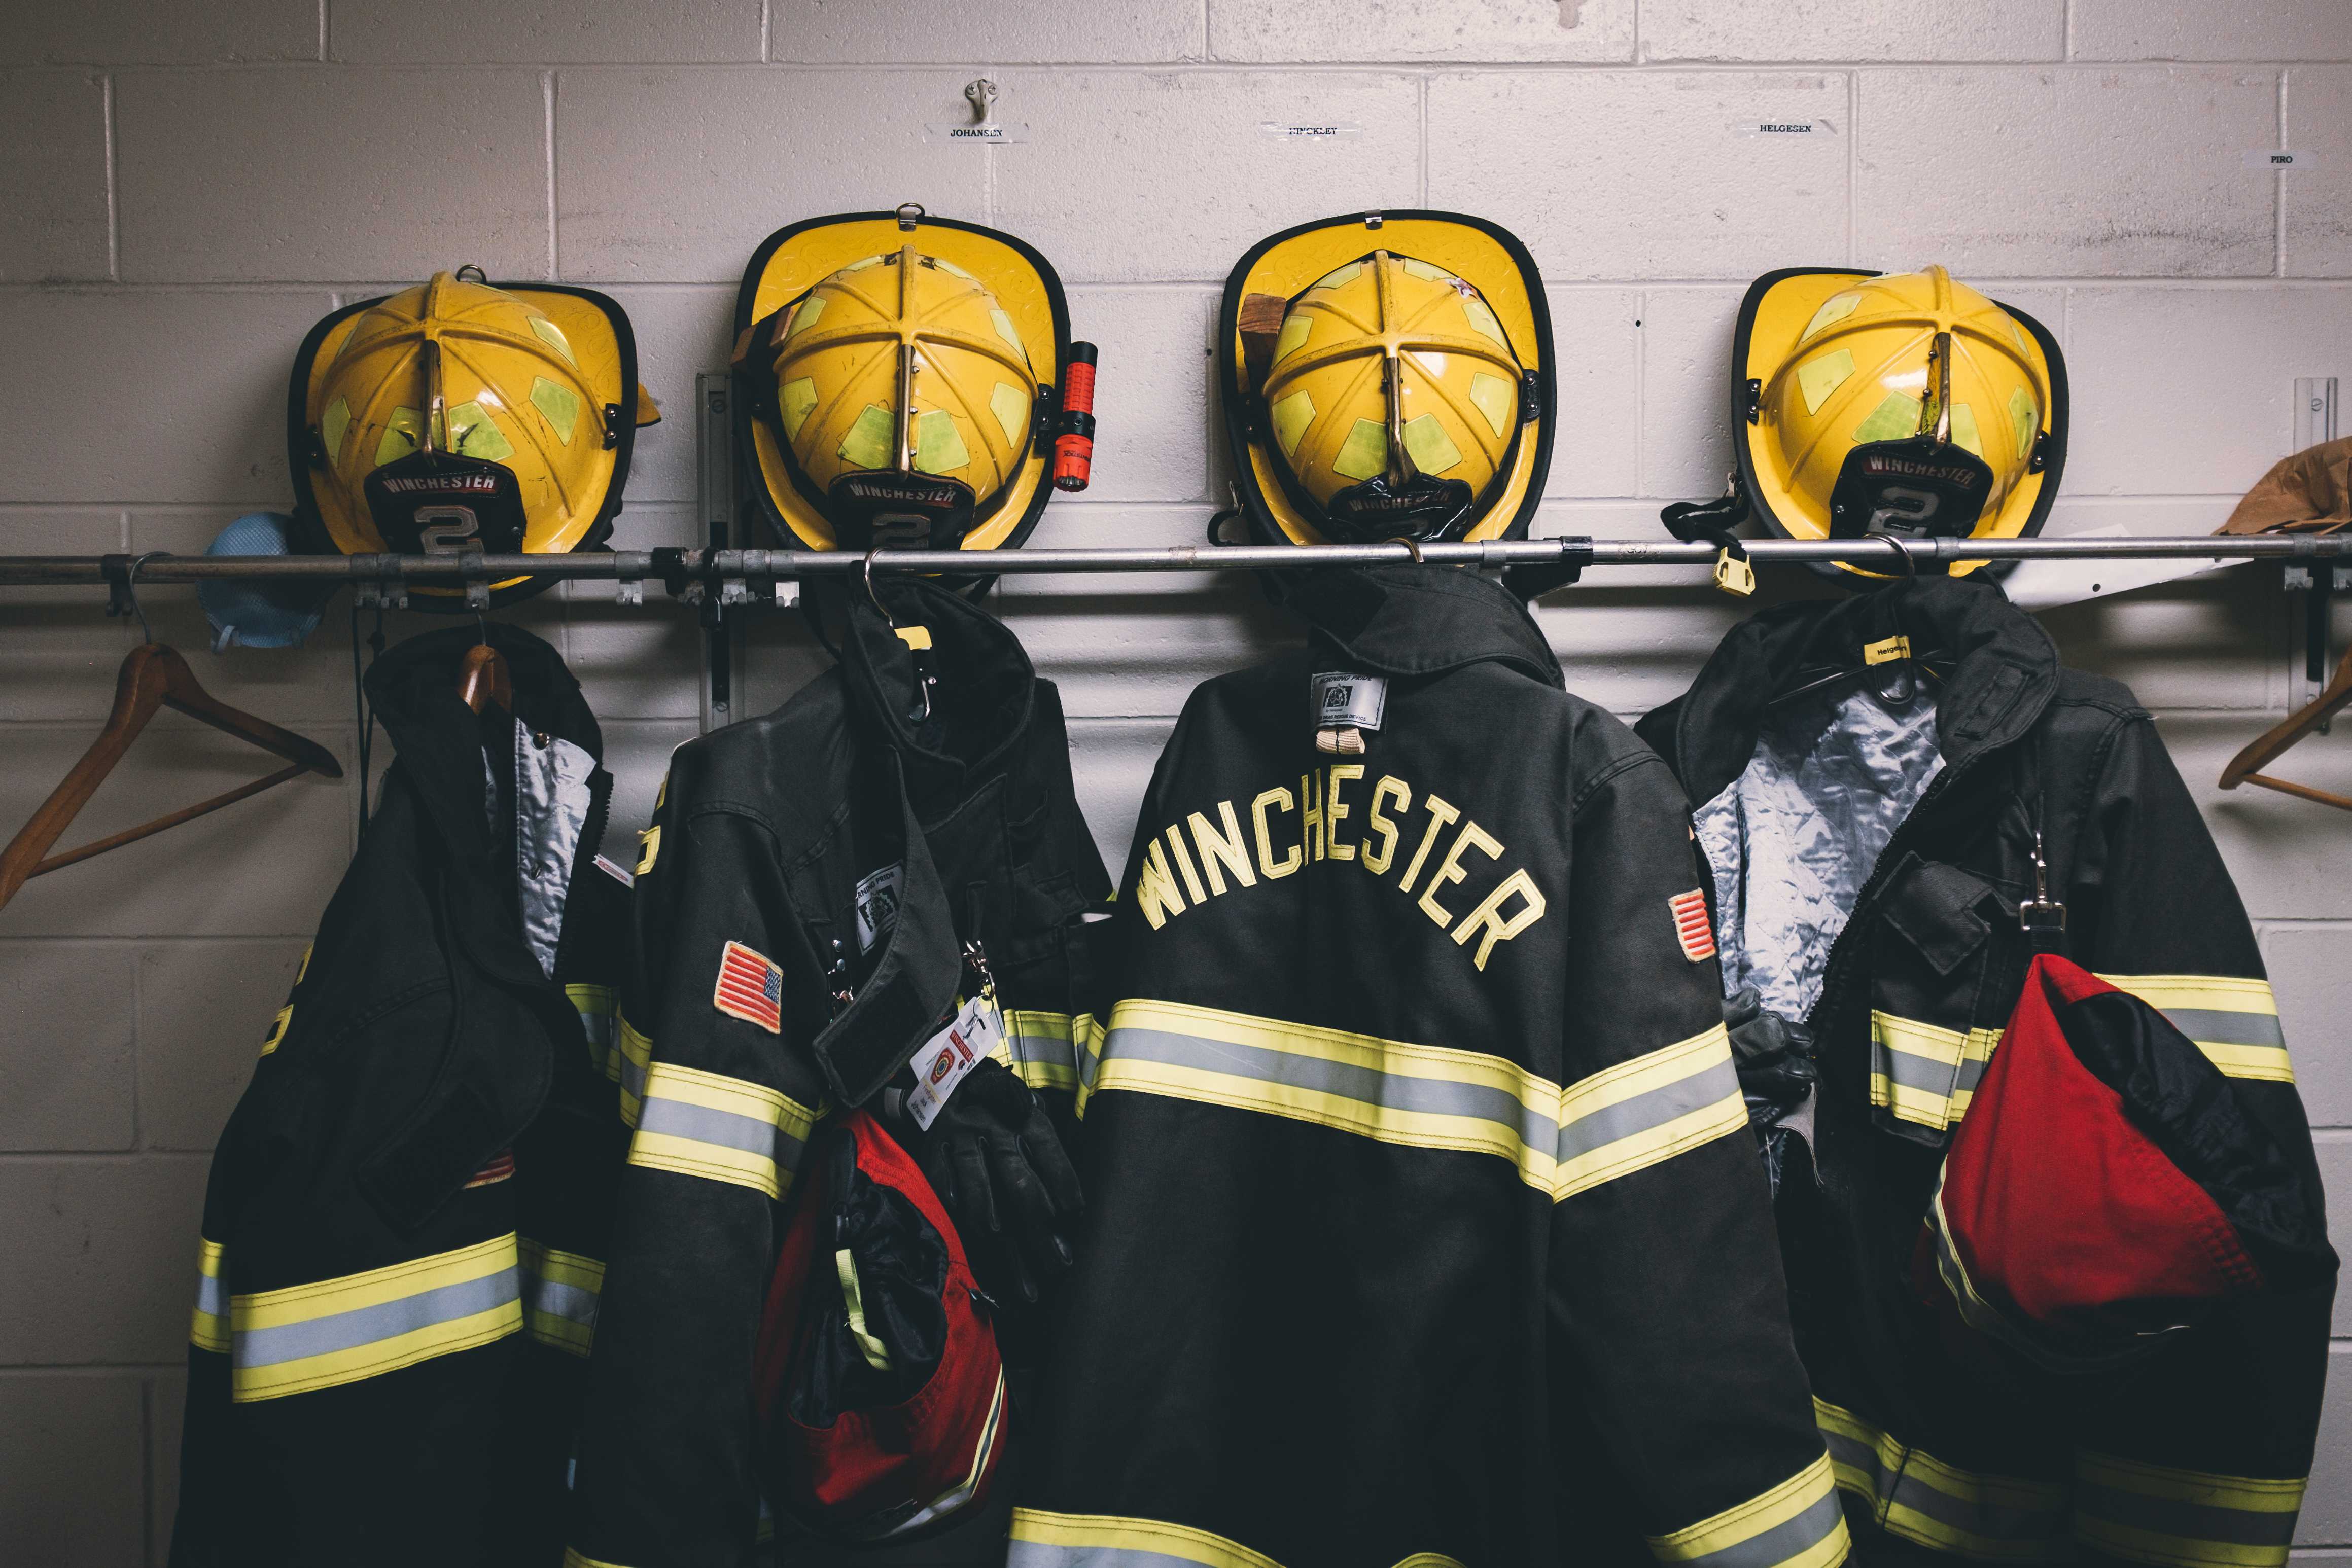 Firefighter turnout gear on a rack